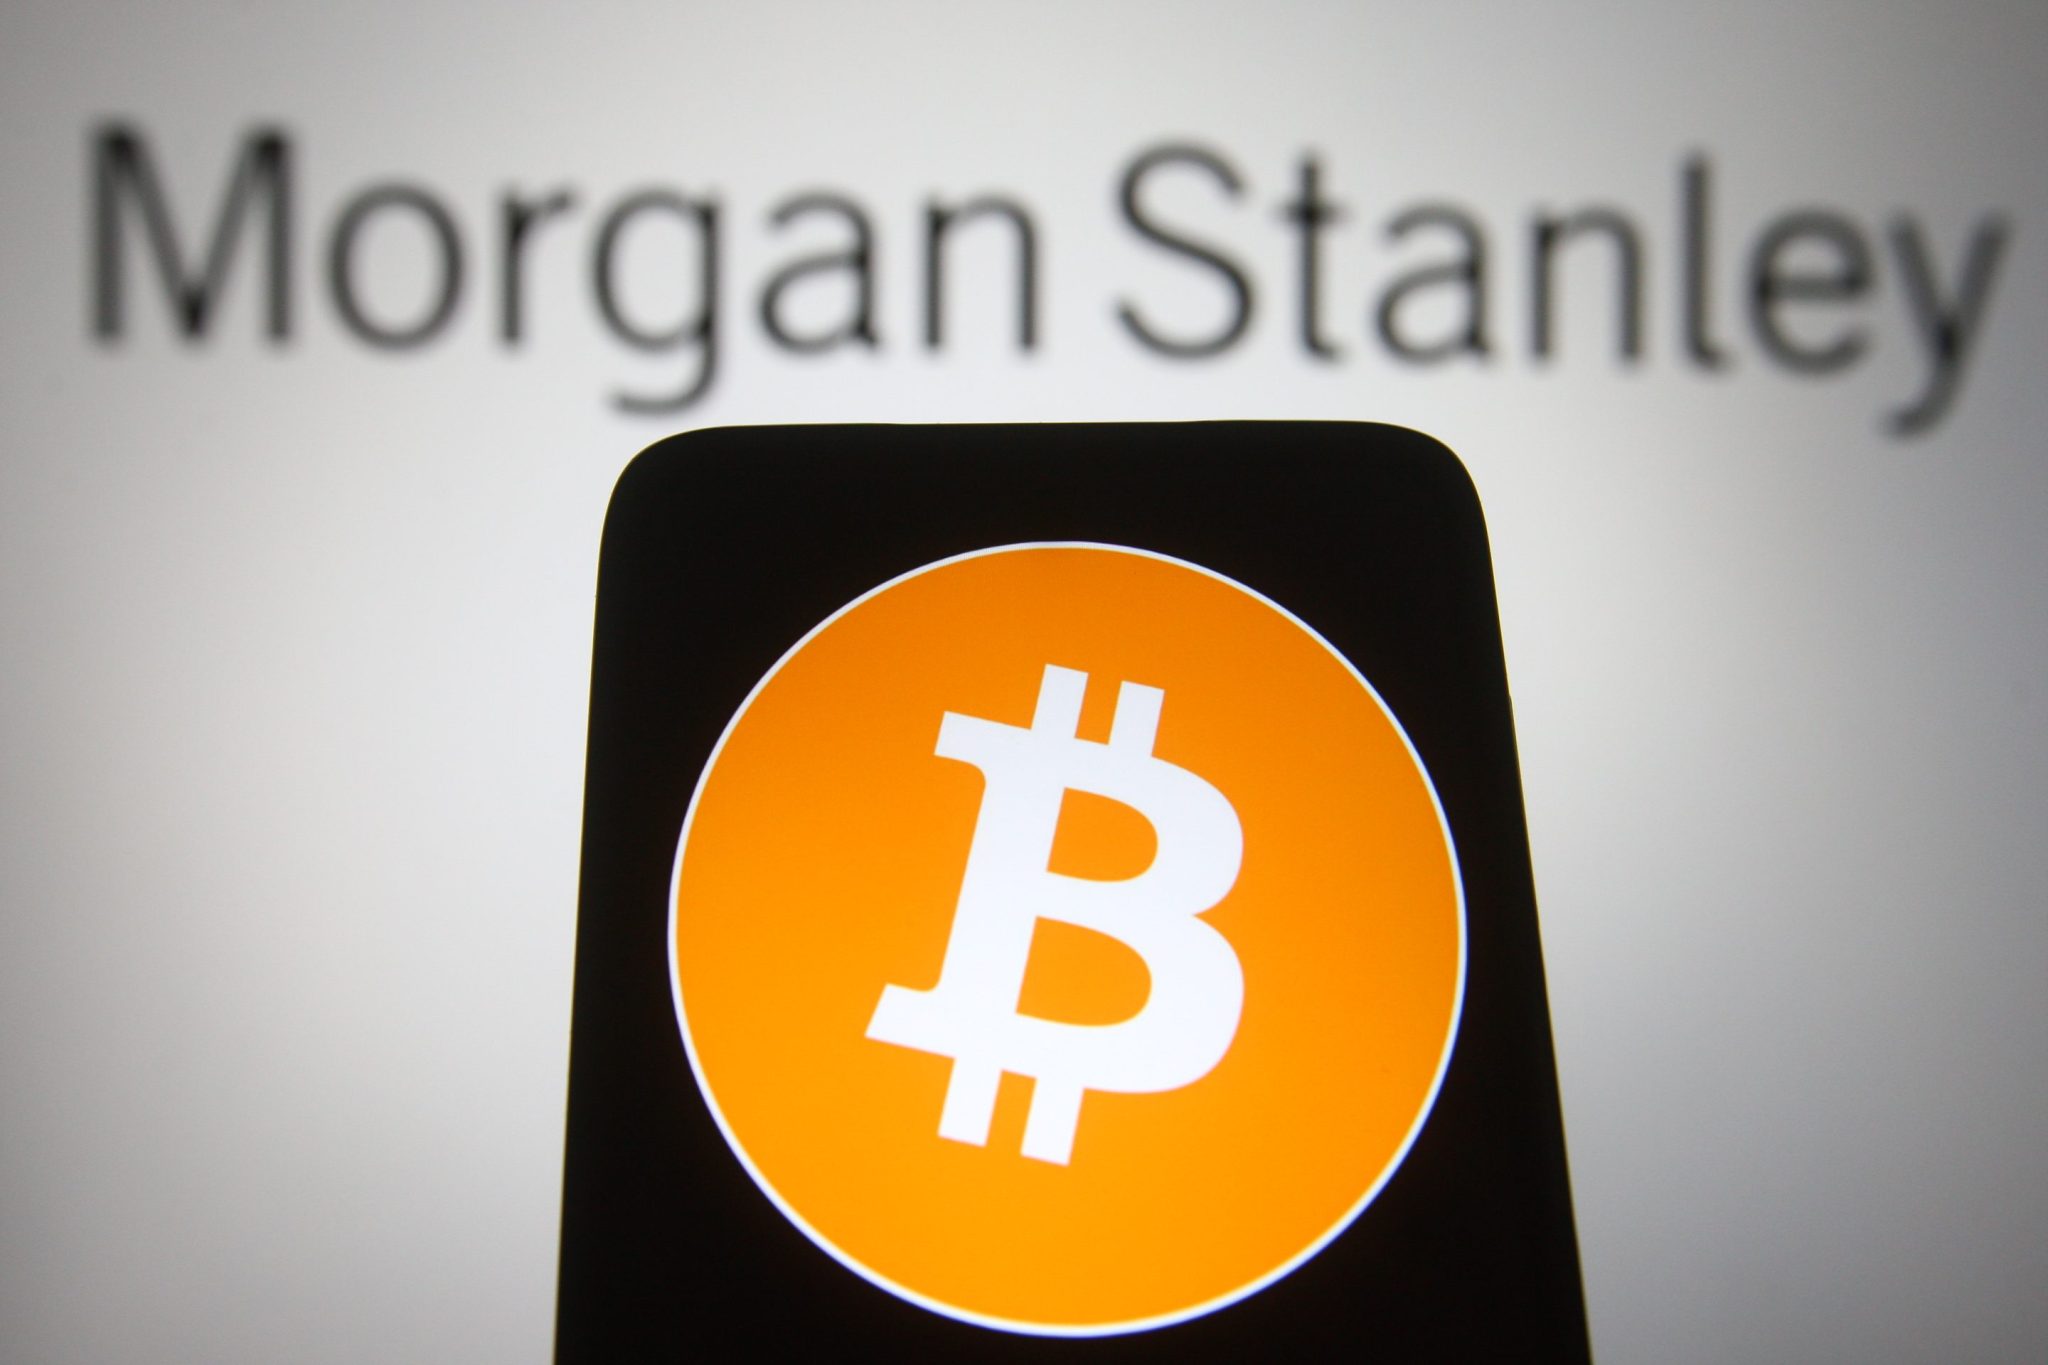 Morgan Stanley reportedly eyeing spot Bitcoin ETFs as demand shows no sign of slowing